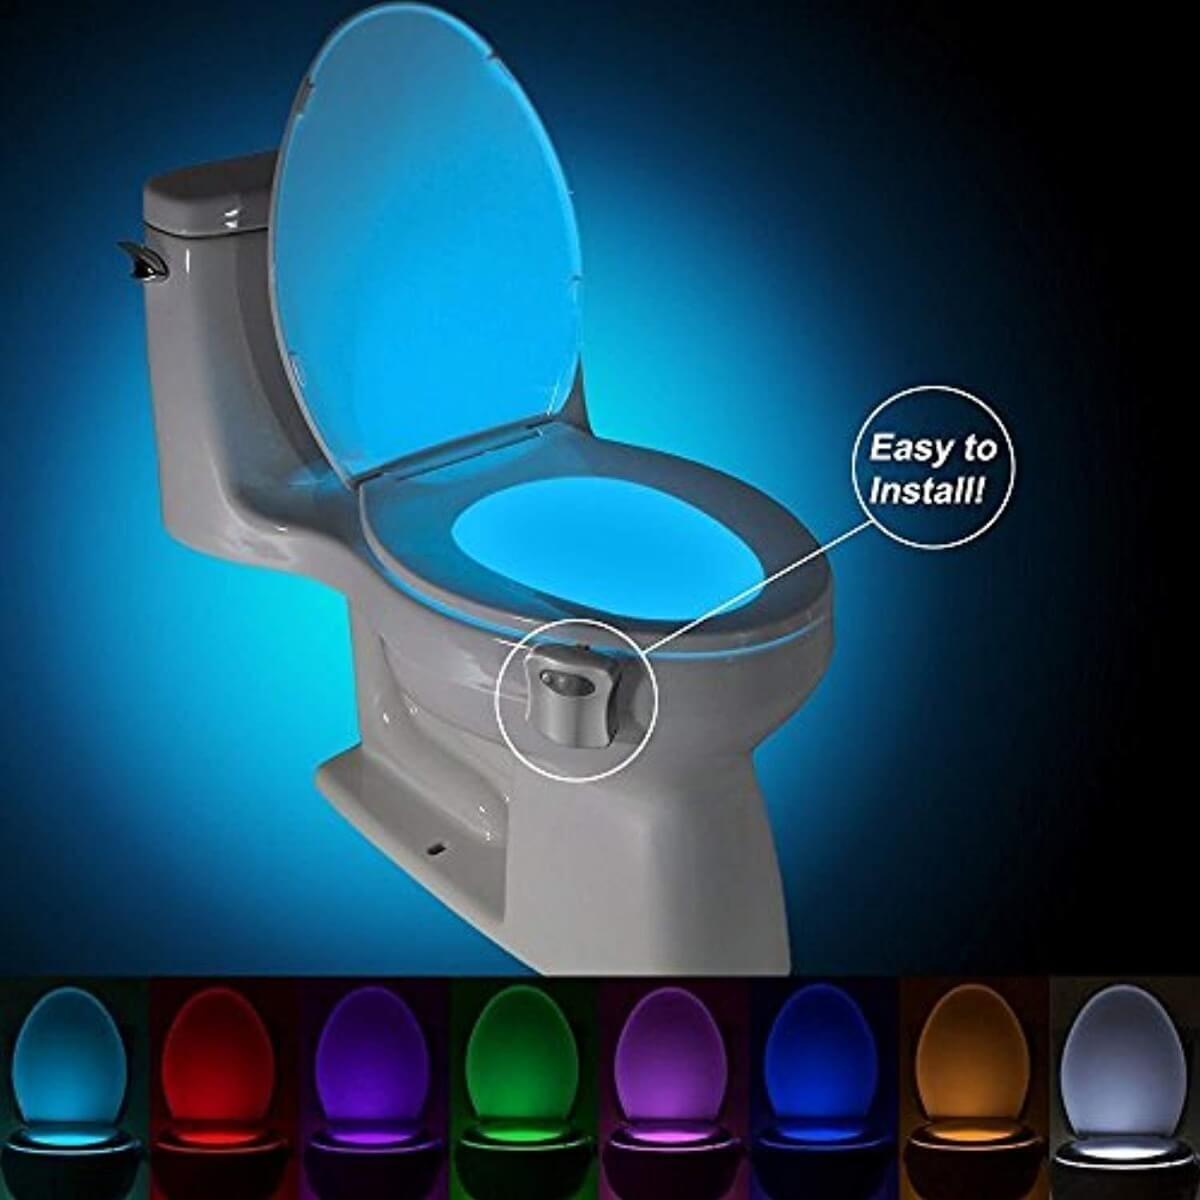 Toilet Seat Light Glow. Shop Floating & Submersible Lights on Mounteen. Worldwide shipping available.